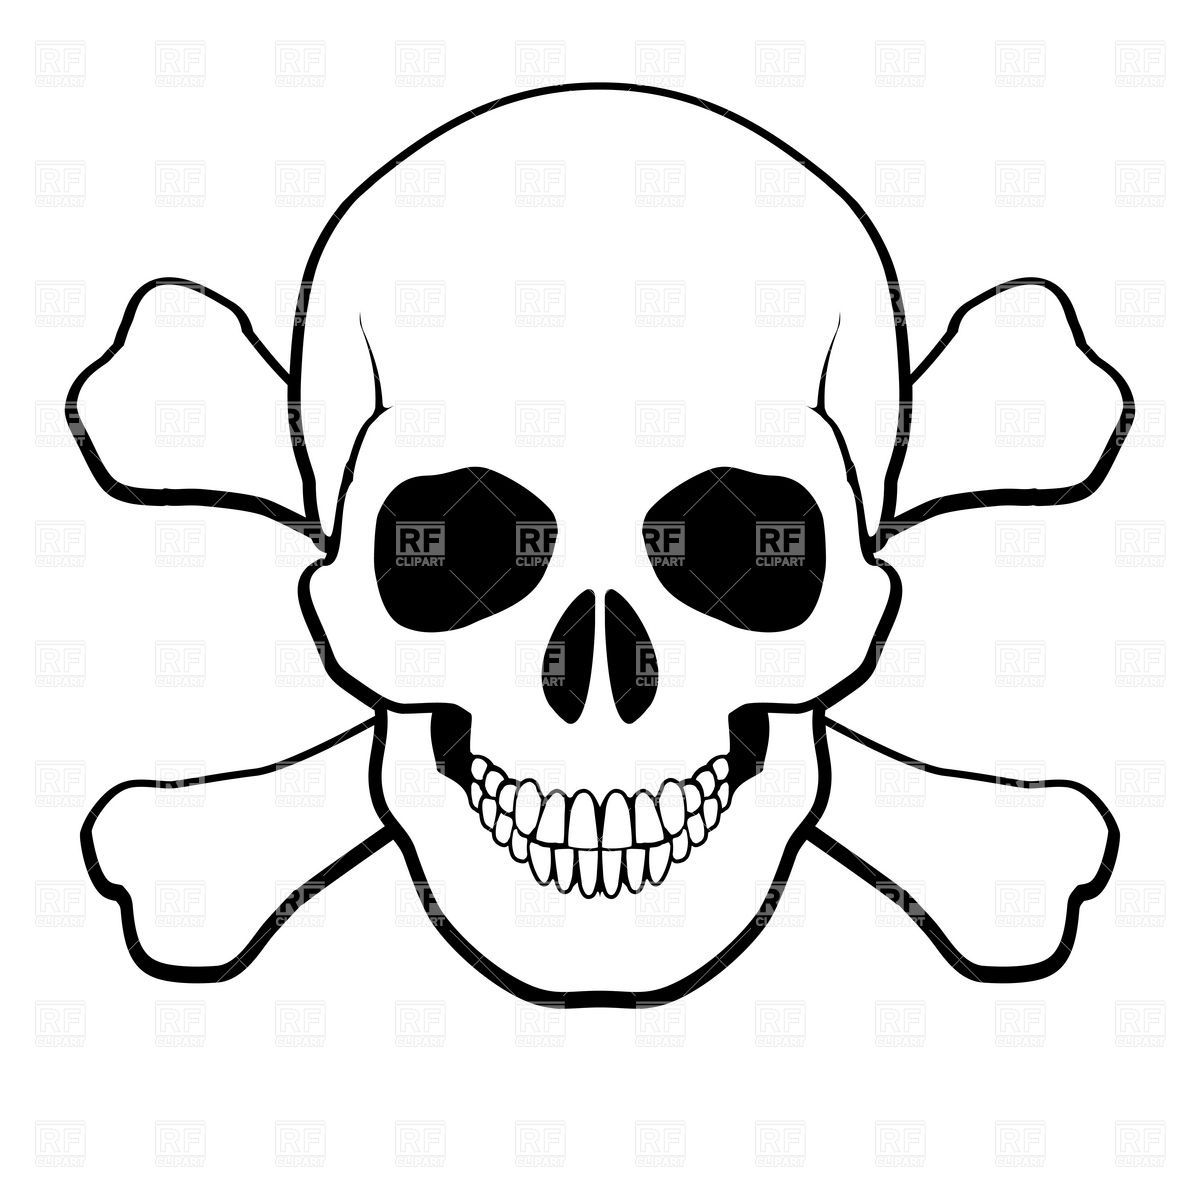 Skull And Crossbones 8296 Download Royalty Free Vector Clipart  Eps